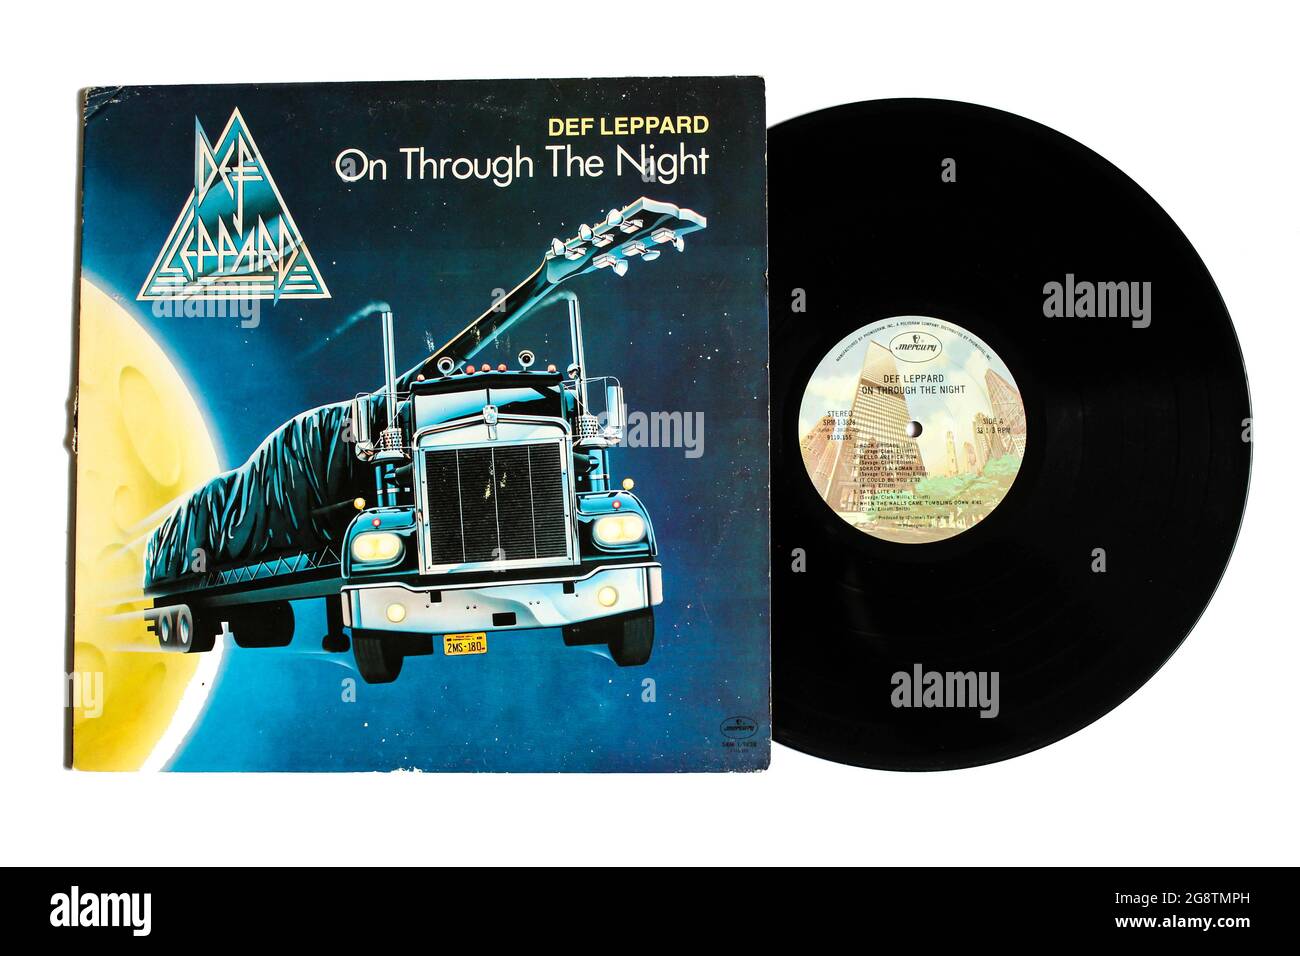 Heavy metal band, Def Leppard music album on vinyl record LP disc. Titled: On Through the Night album cover Stock Photo